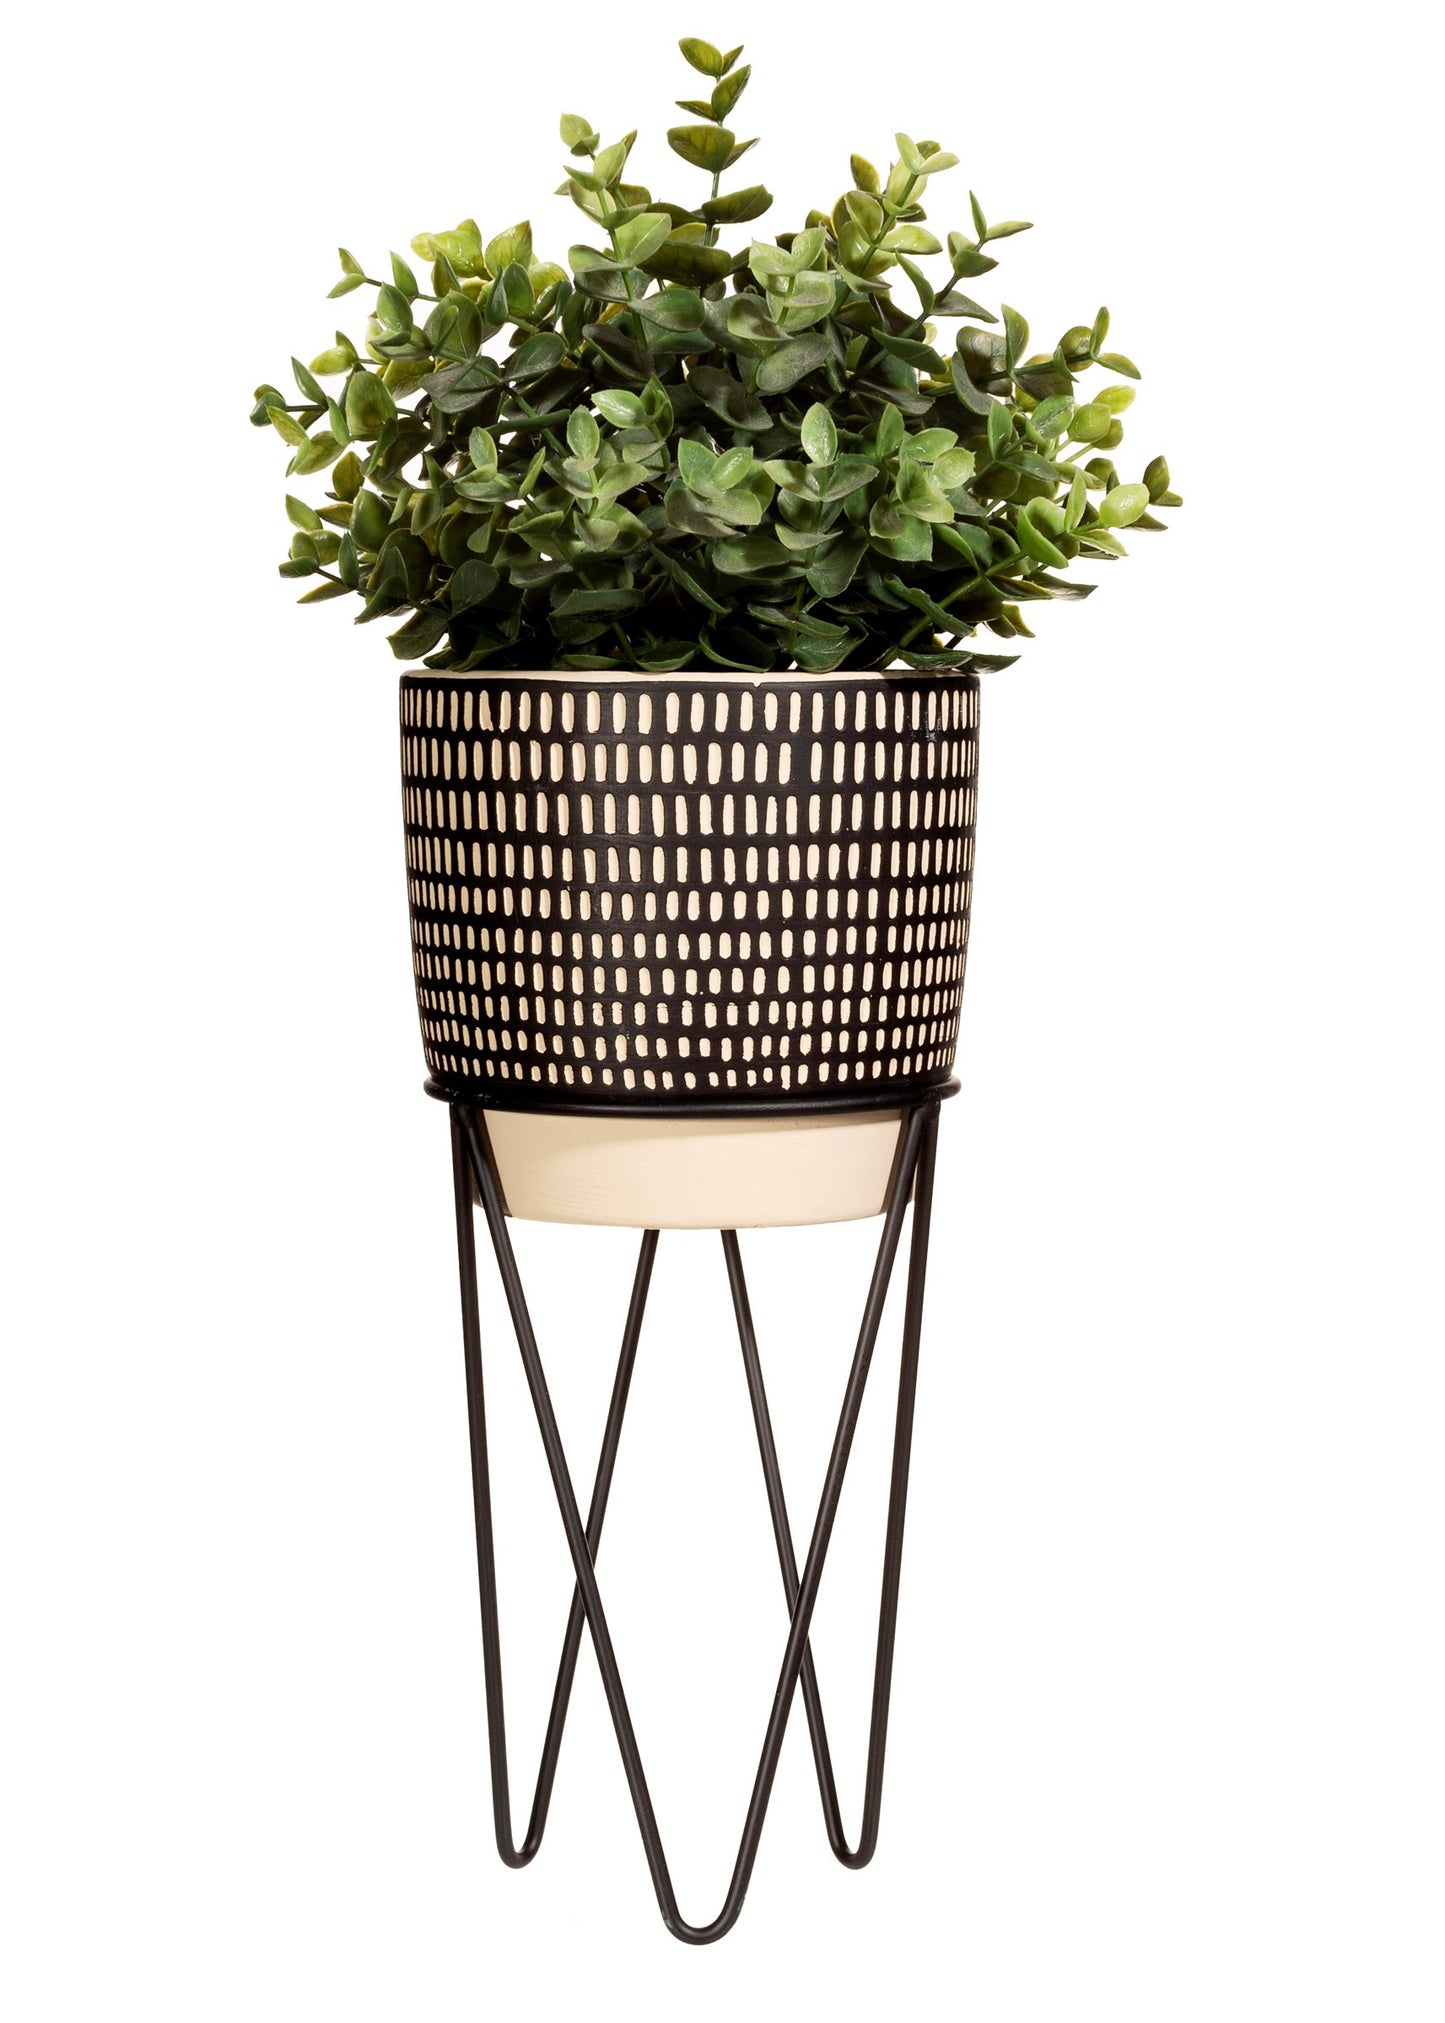 *Sass & Belle Black Dash Cement Planter with Wire Stand